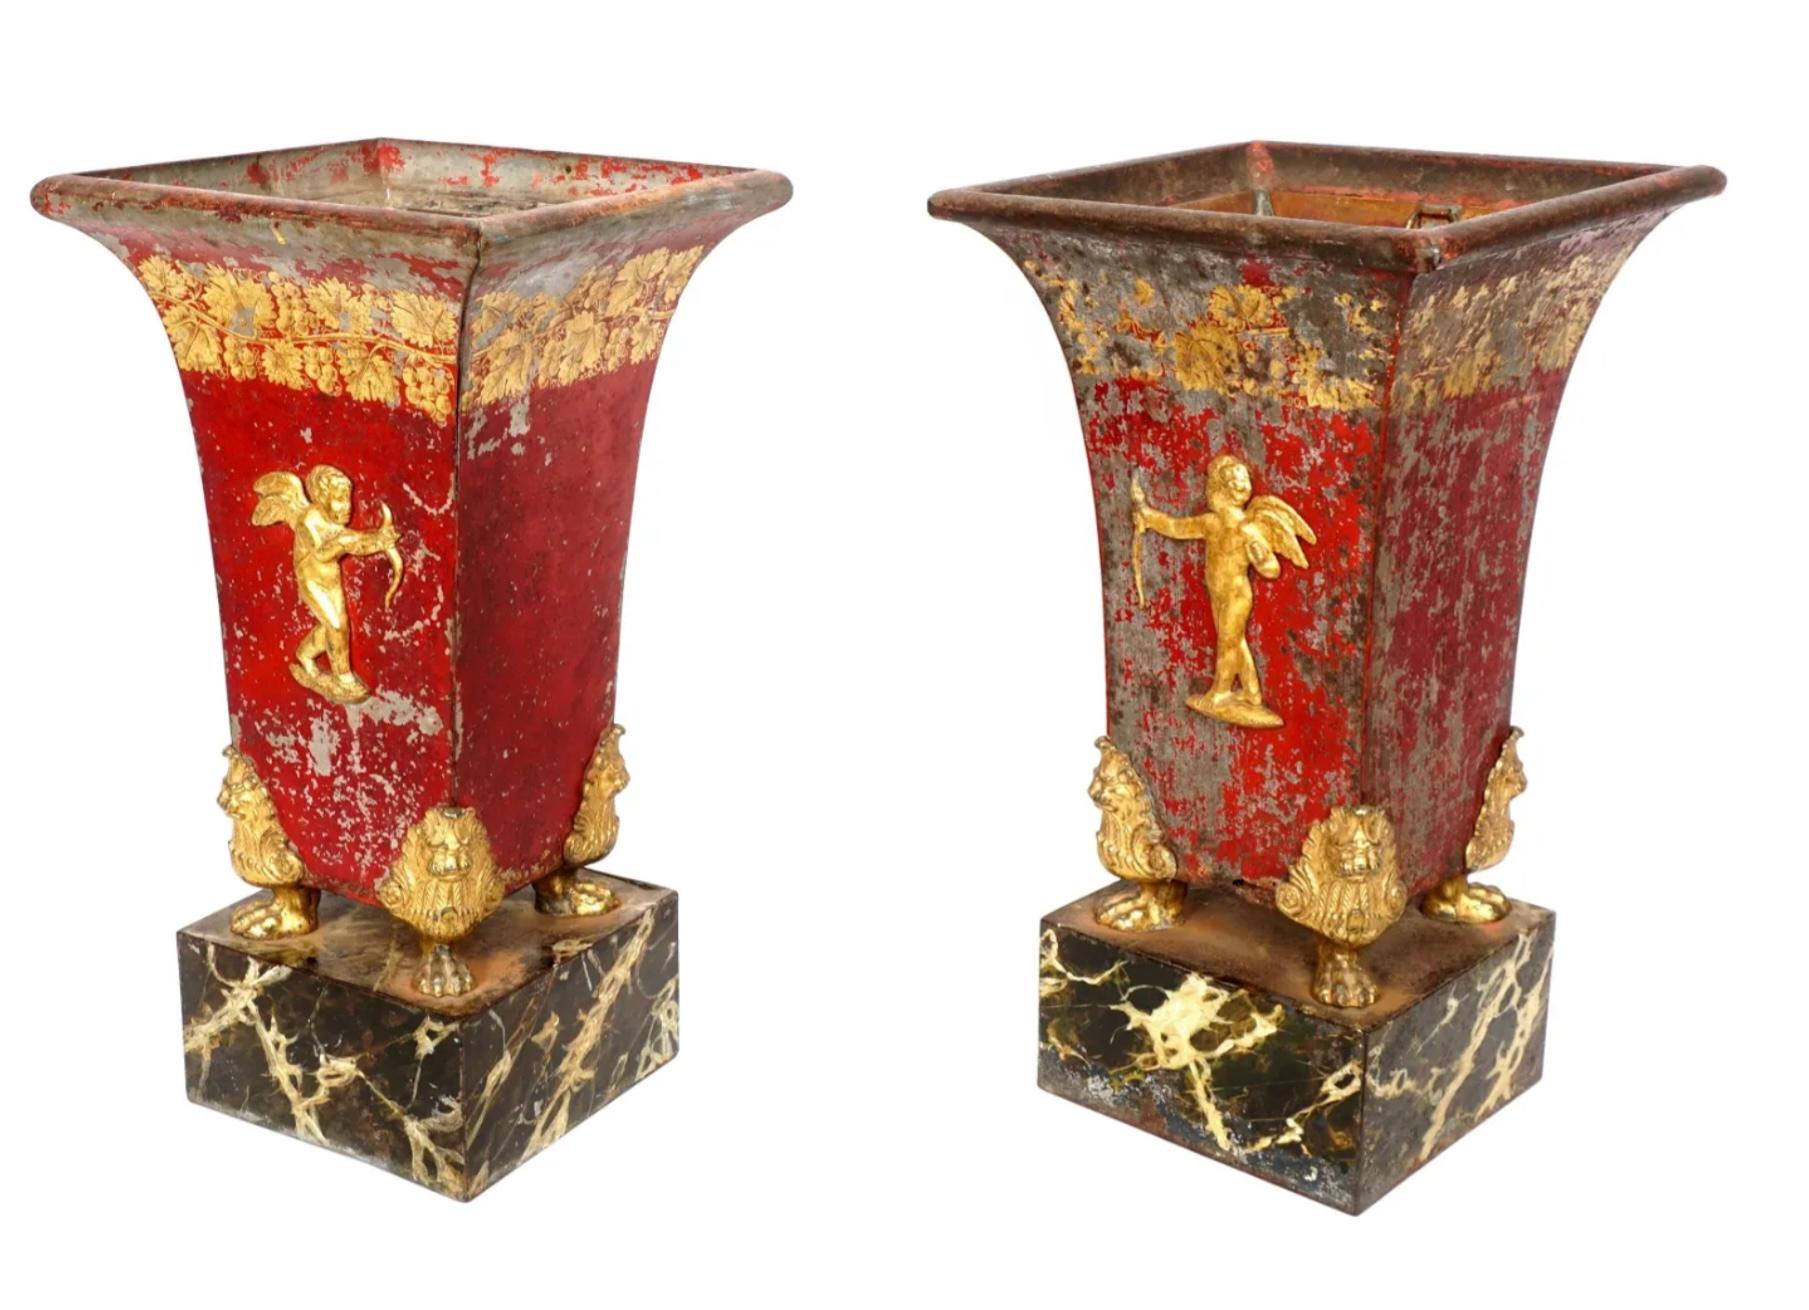 Spectacular large pair of French Empire Tole painted metal cache pot vases with applied gilt bronze cupid, on four gilt bronze paw feet. Lower faux marble painted metal bases. Both with copper inserts. Original painted finish time worn to a